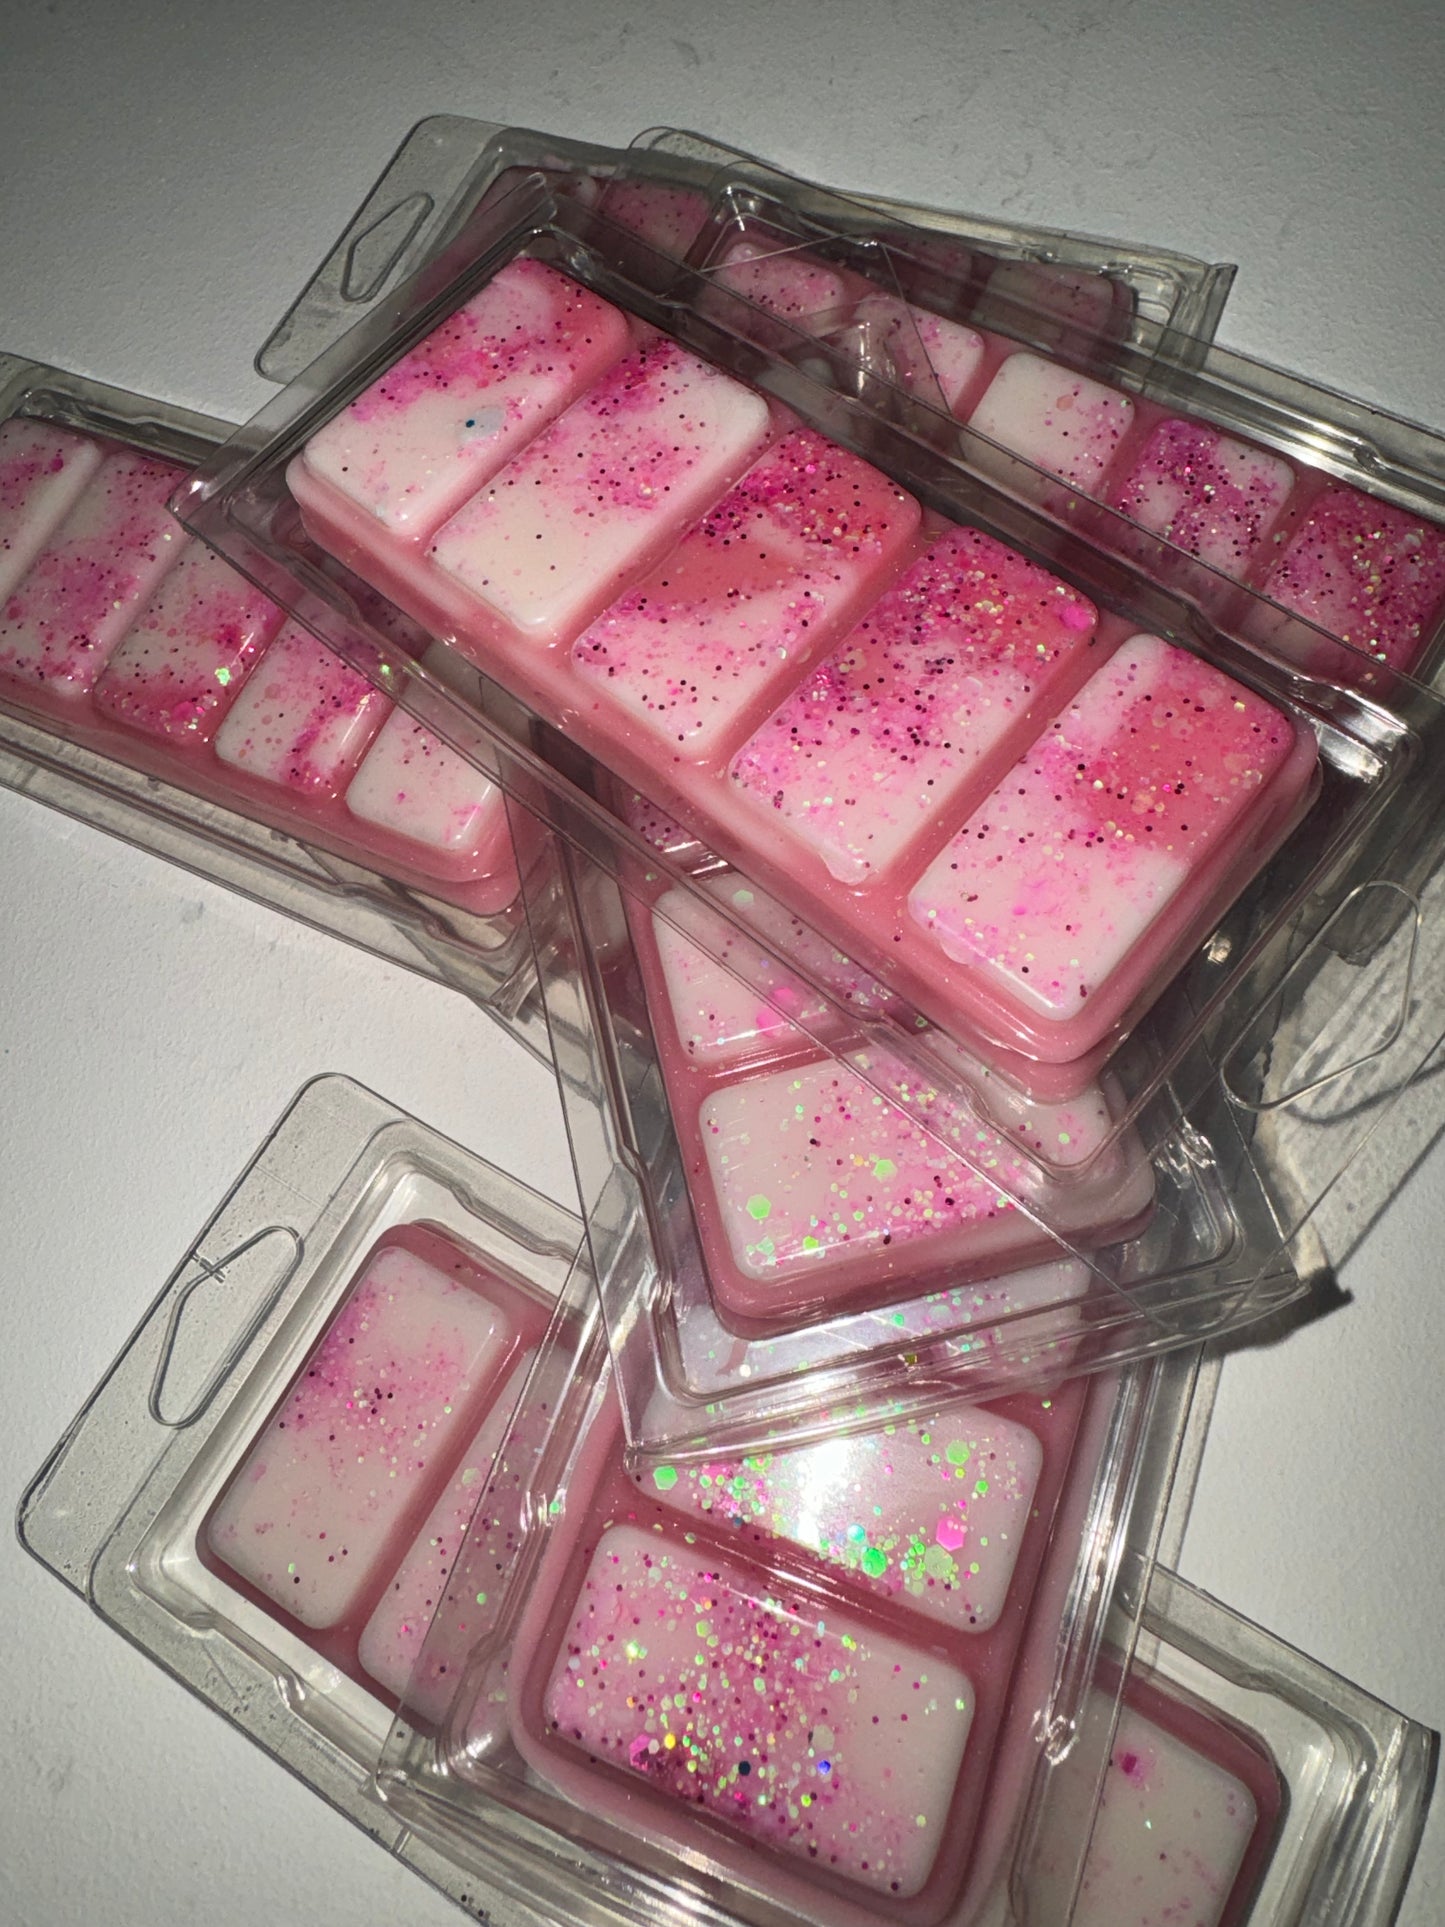 Snap Bar - 5 Cell - Candy Floss (Inspired by Sweets)